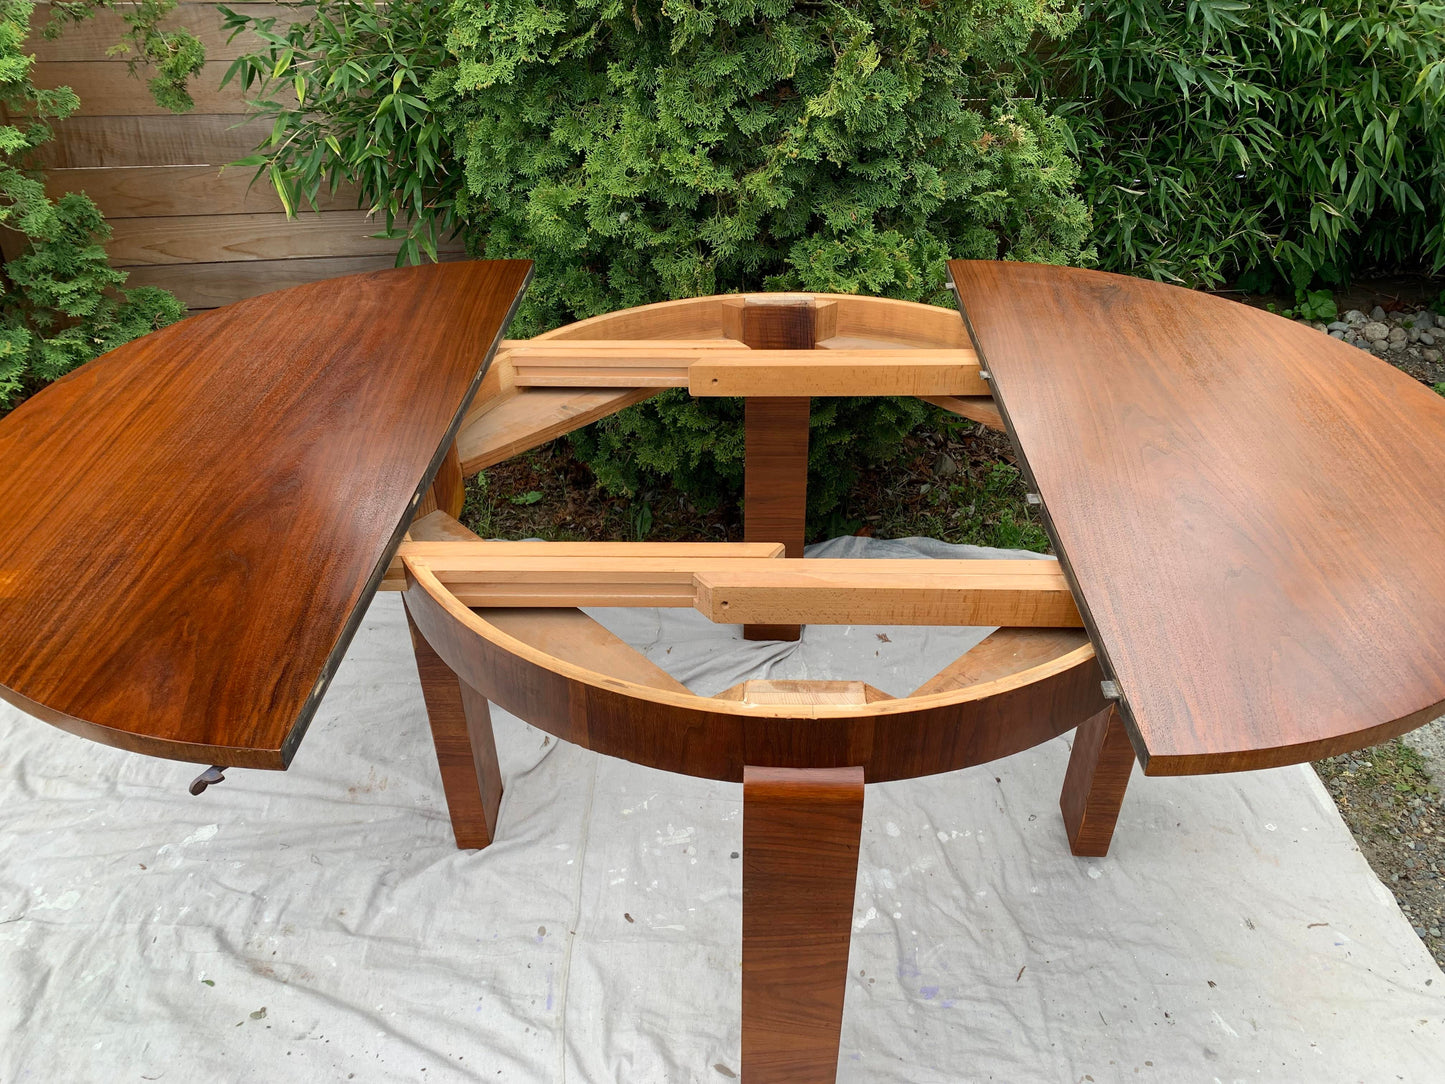 1950s Art Deco Style Circular Expandable Walnut Dining Table With Waterfall Leg